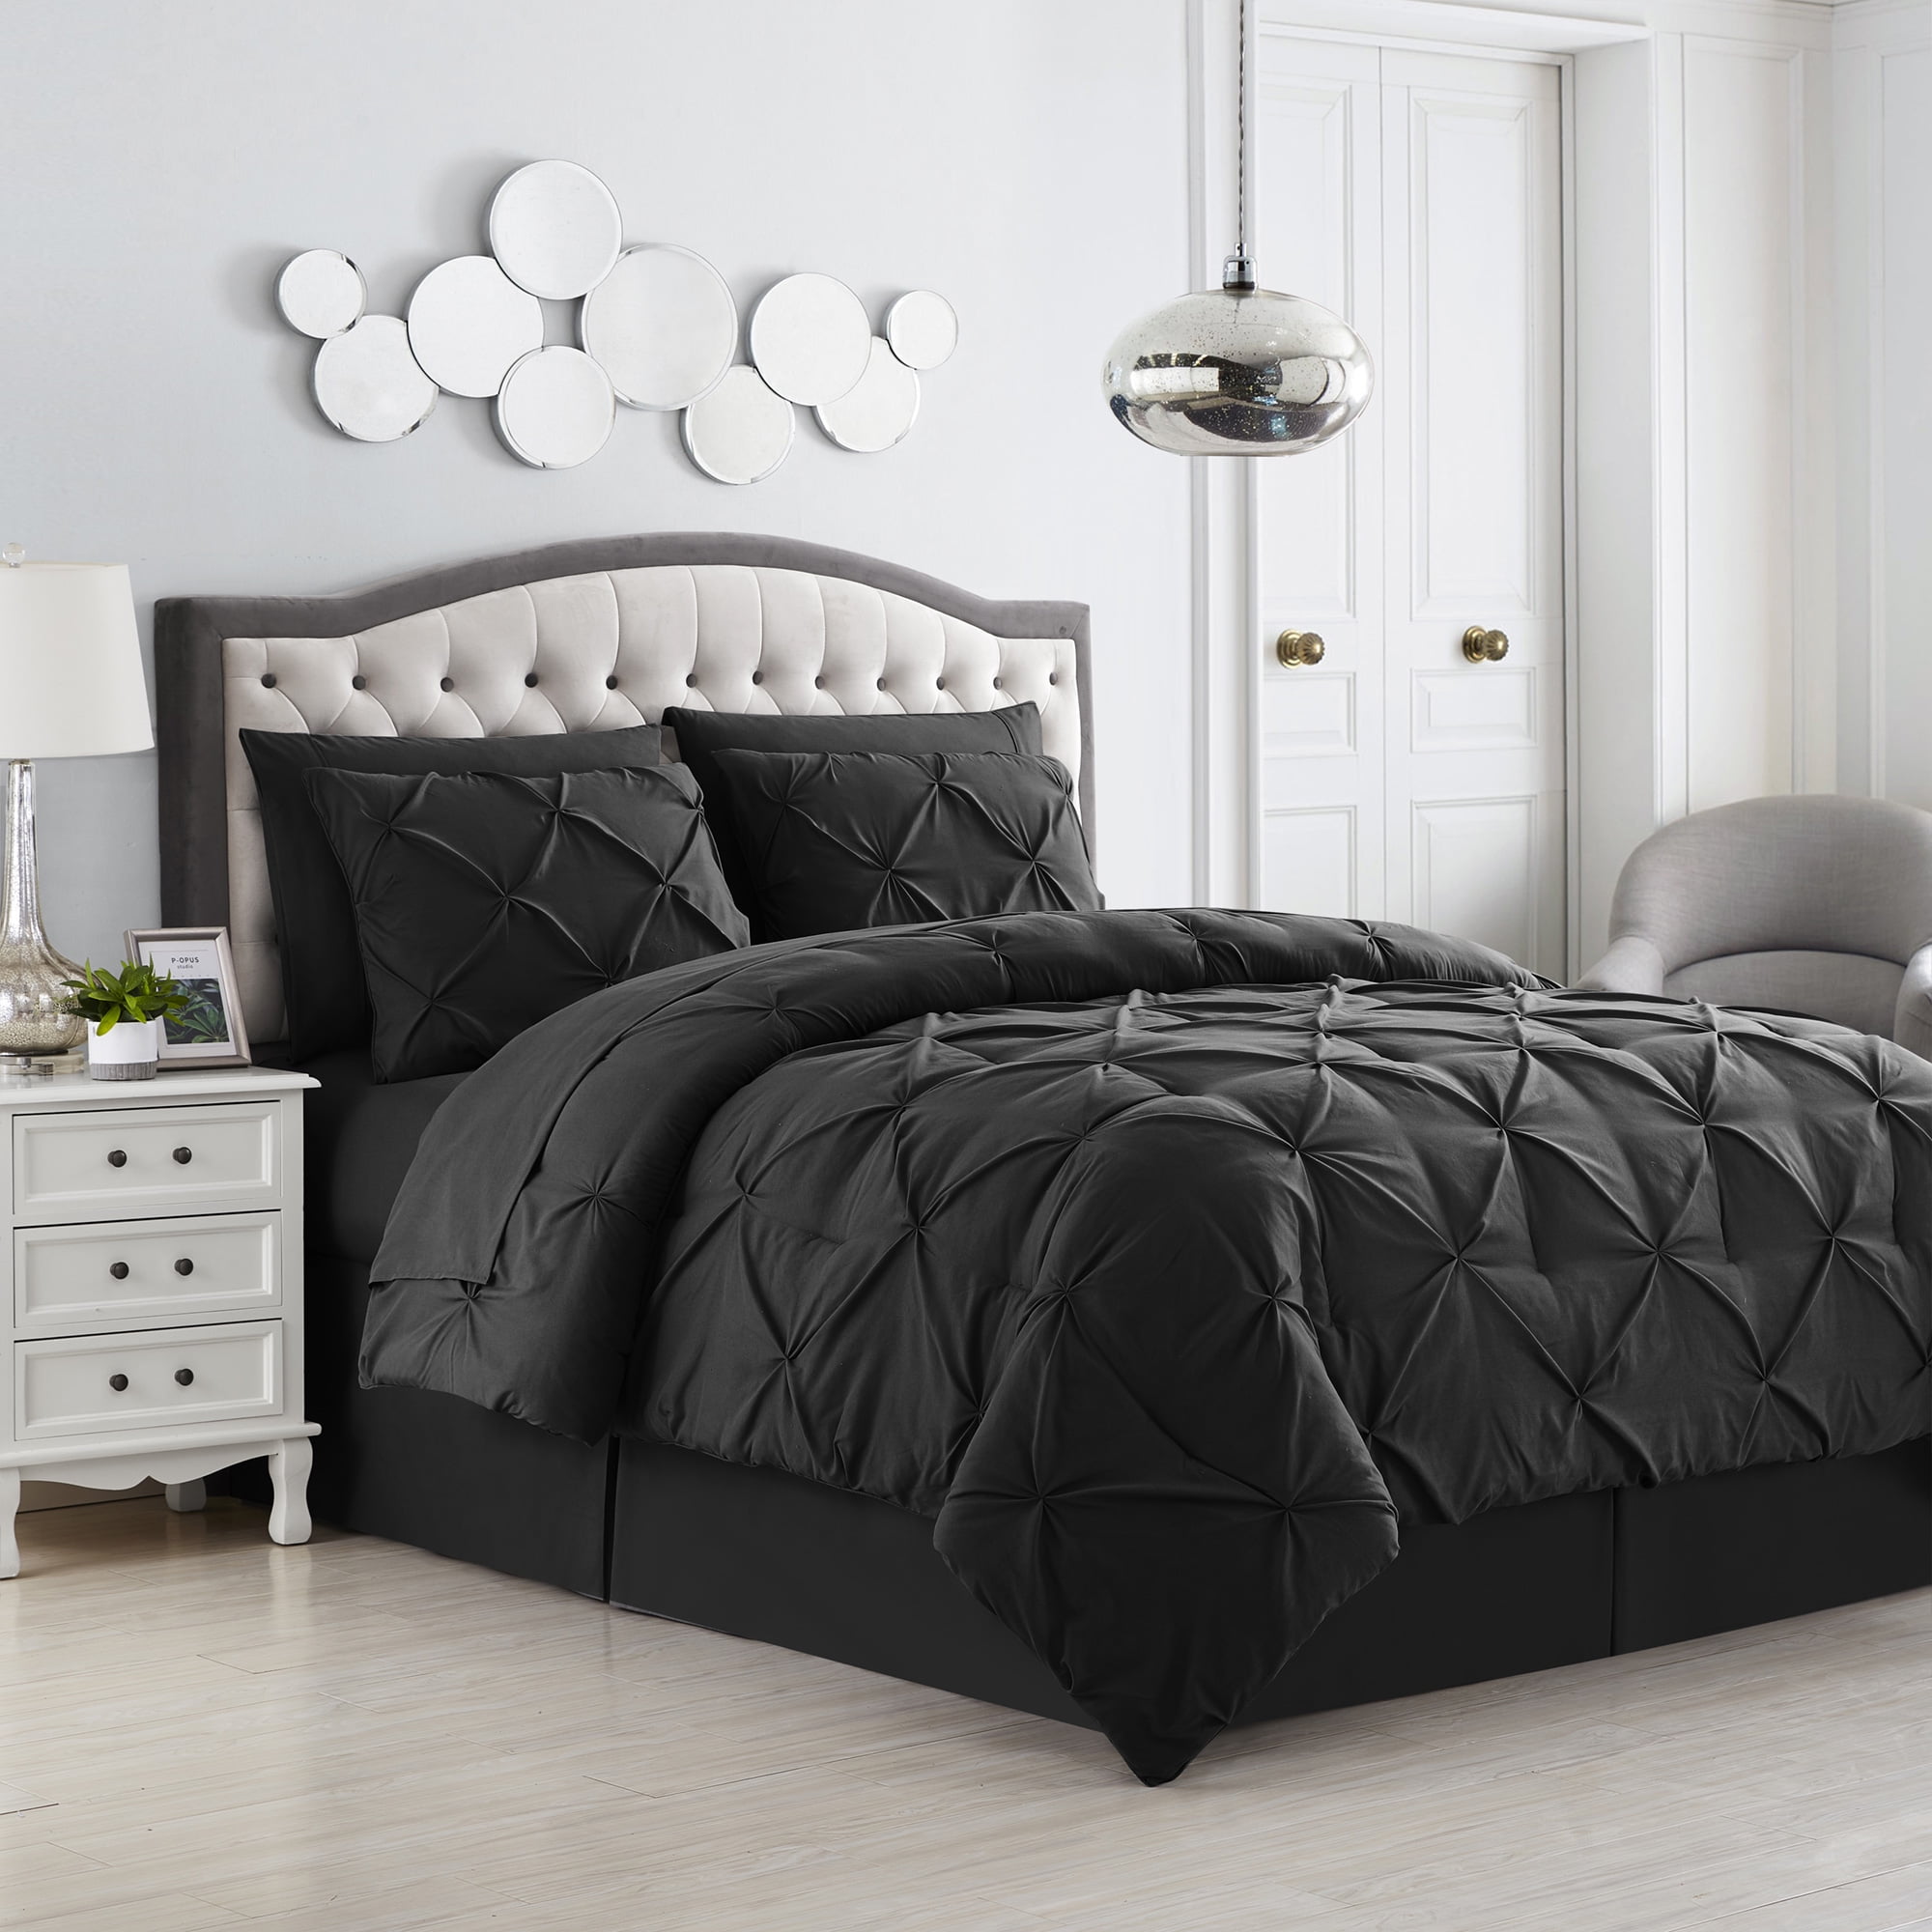 Queen King Bed Solid Black White Pintuck Pleat Stripe 8 pc Comforter Set Bedding 